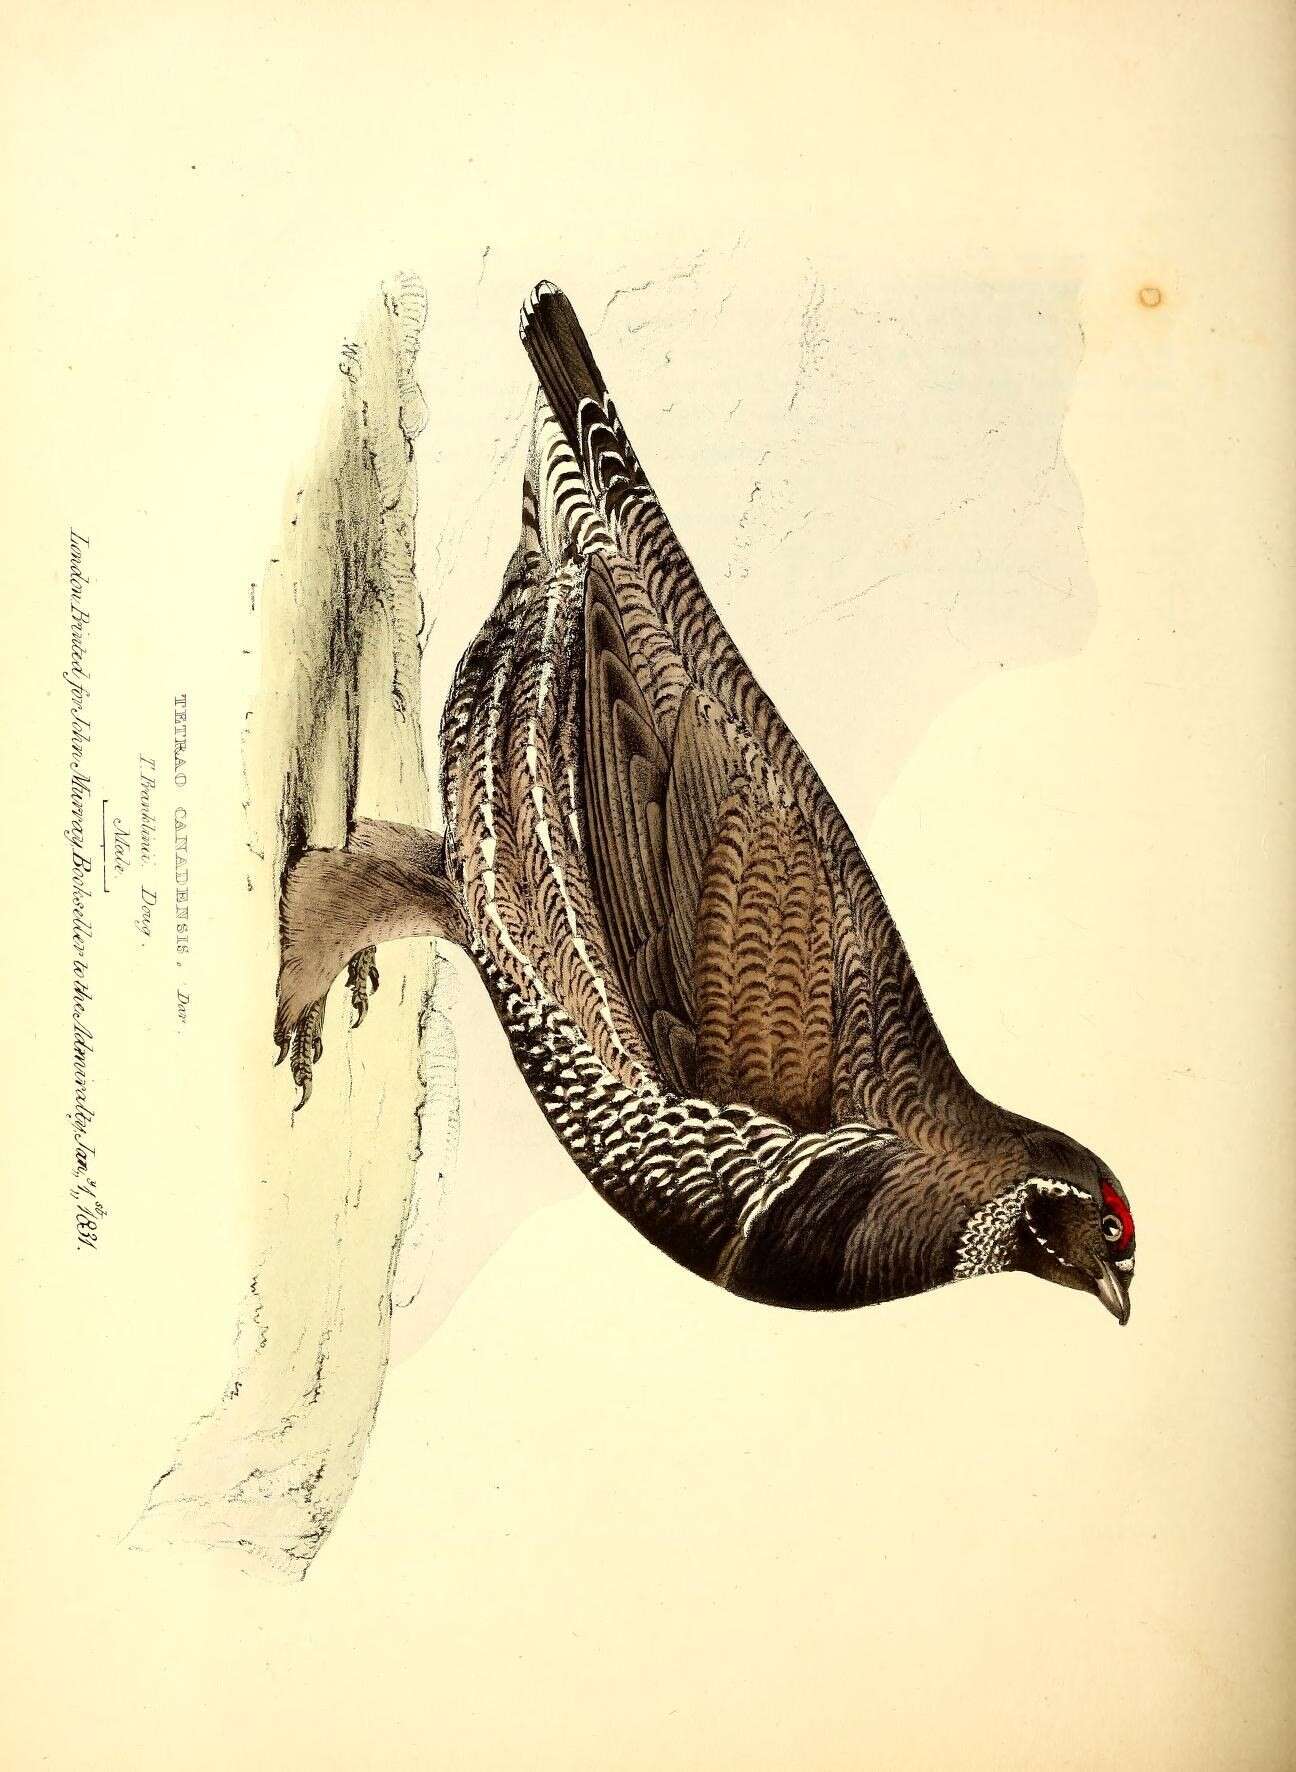 Image of Spruce Grouse